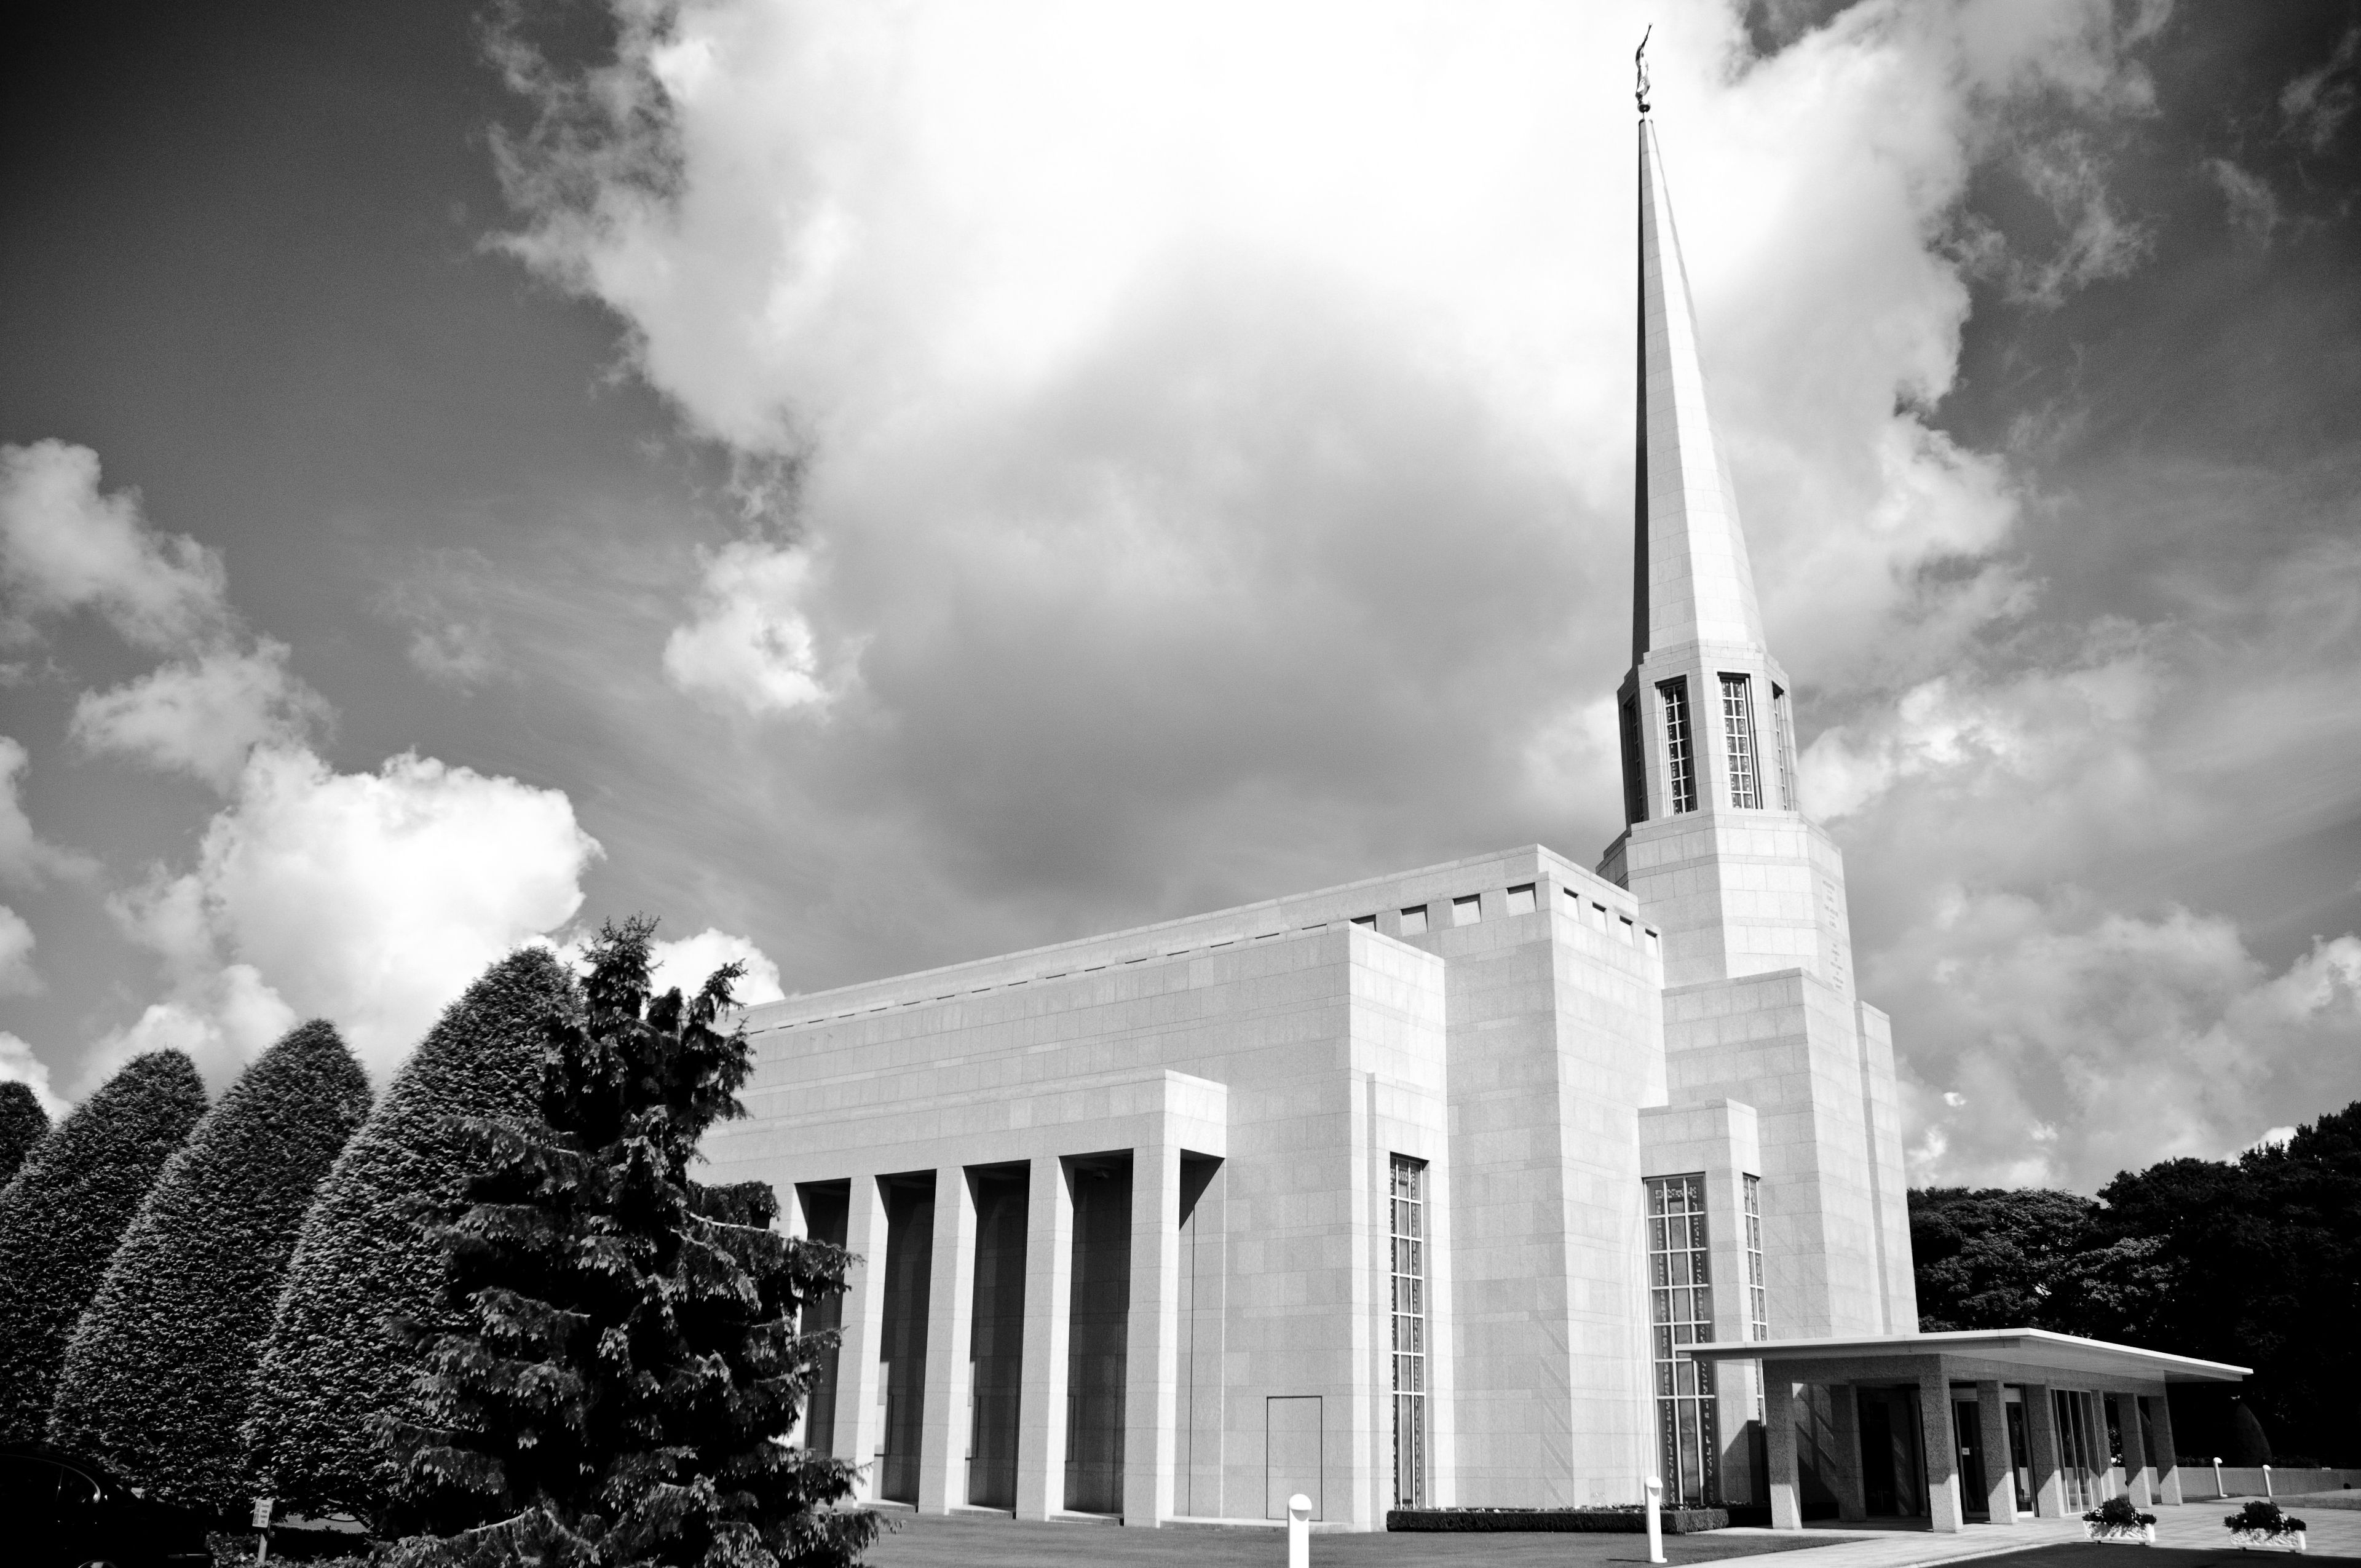 The Preston England Temple in black and white, including the entrance and scenery.